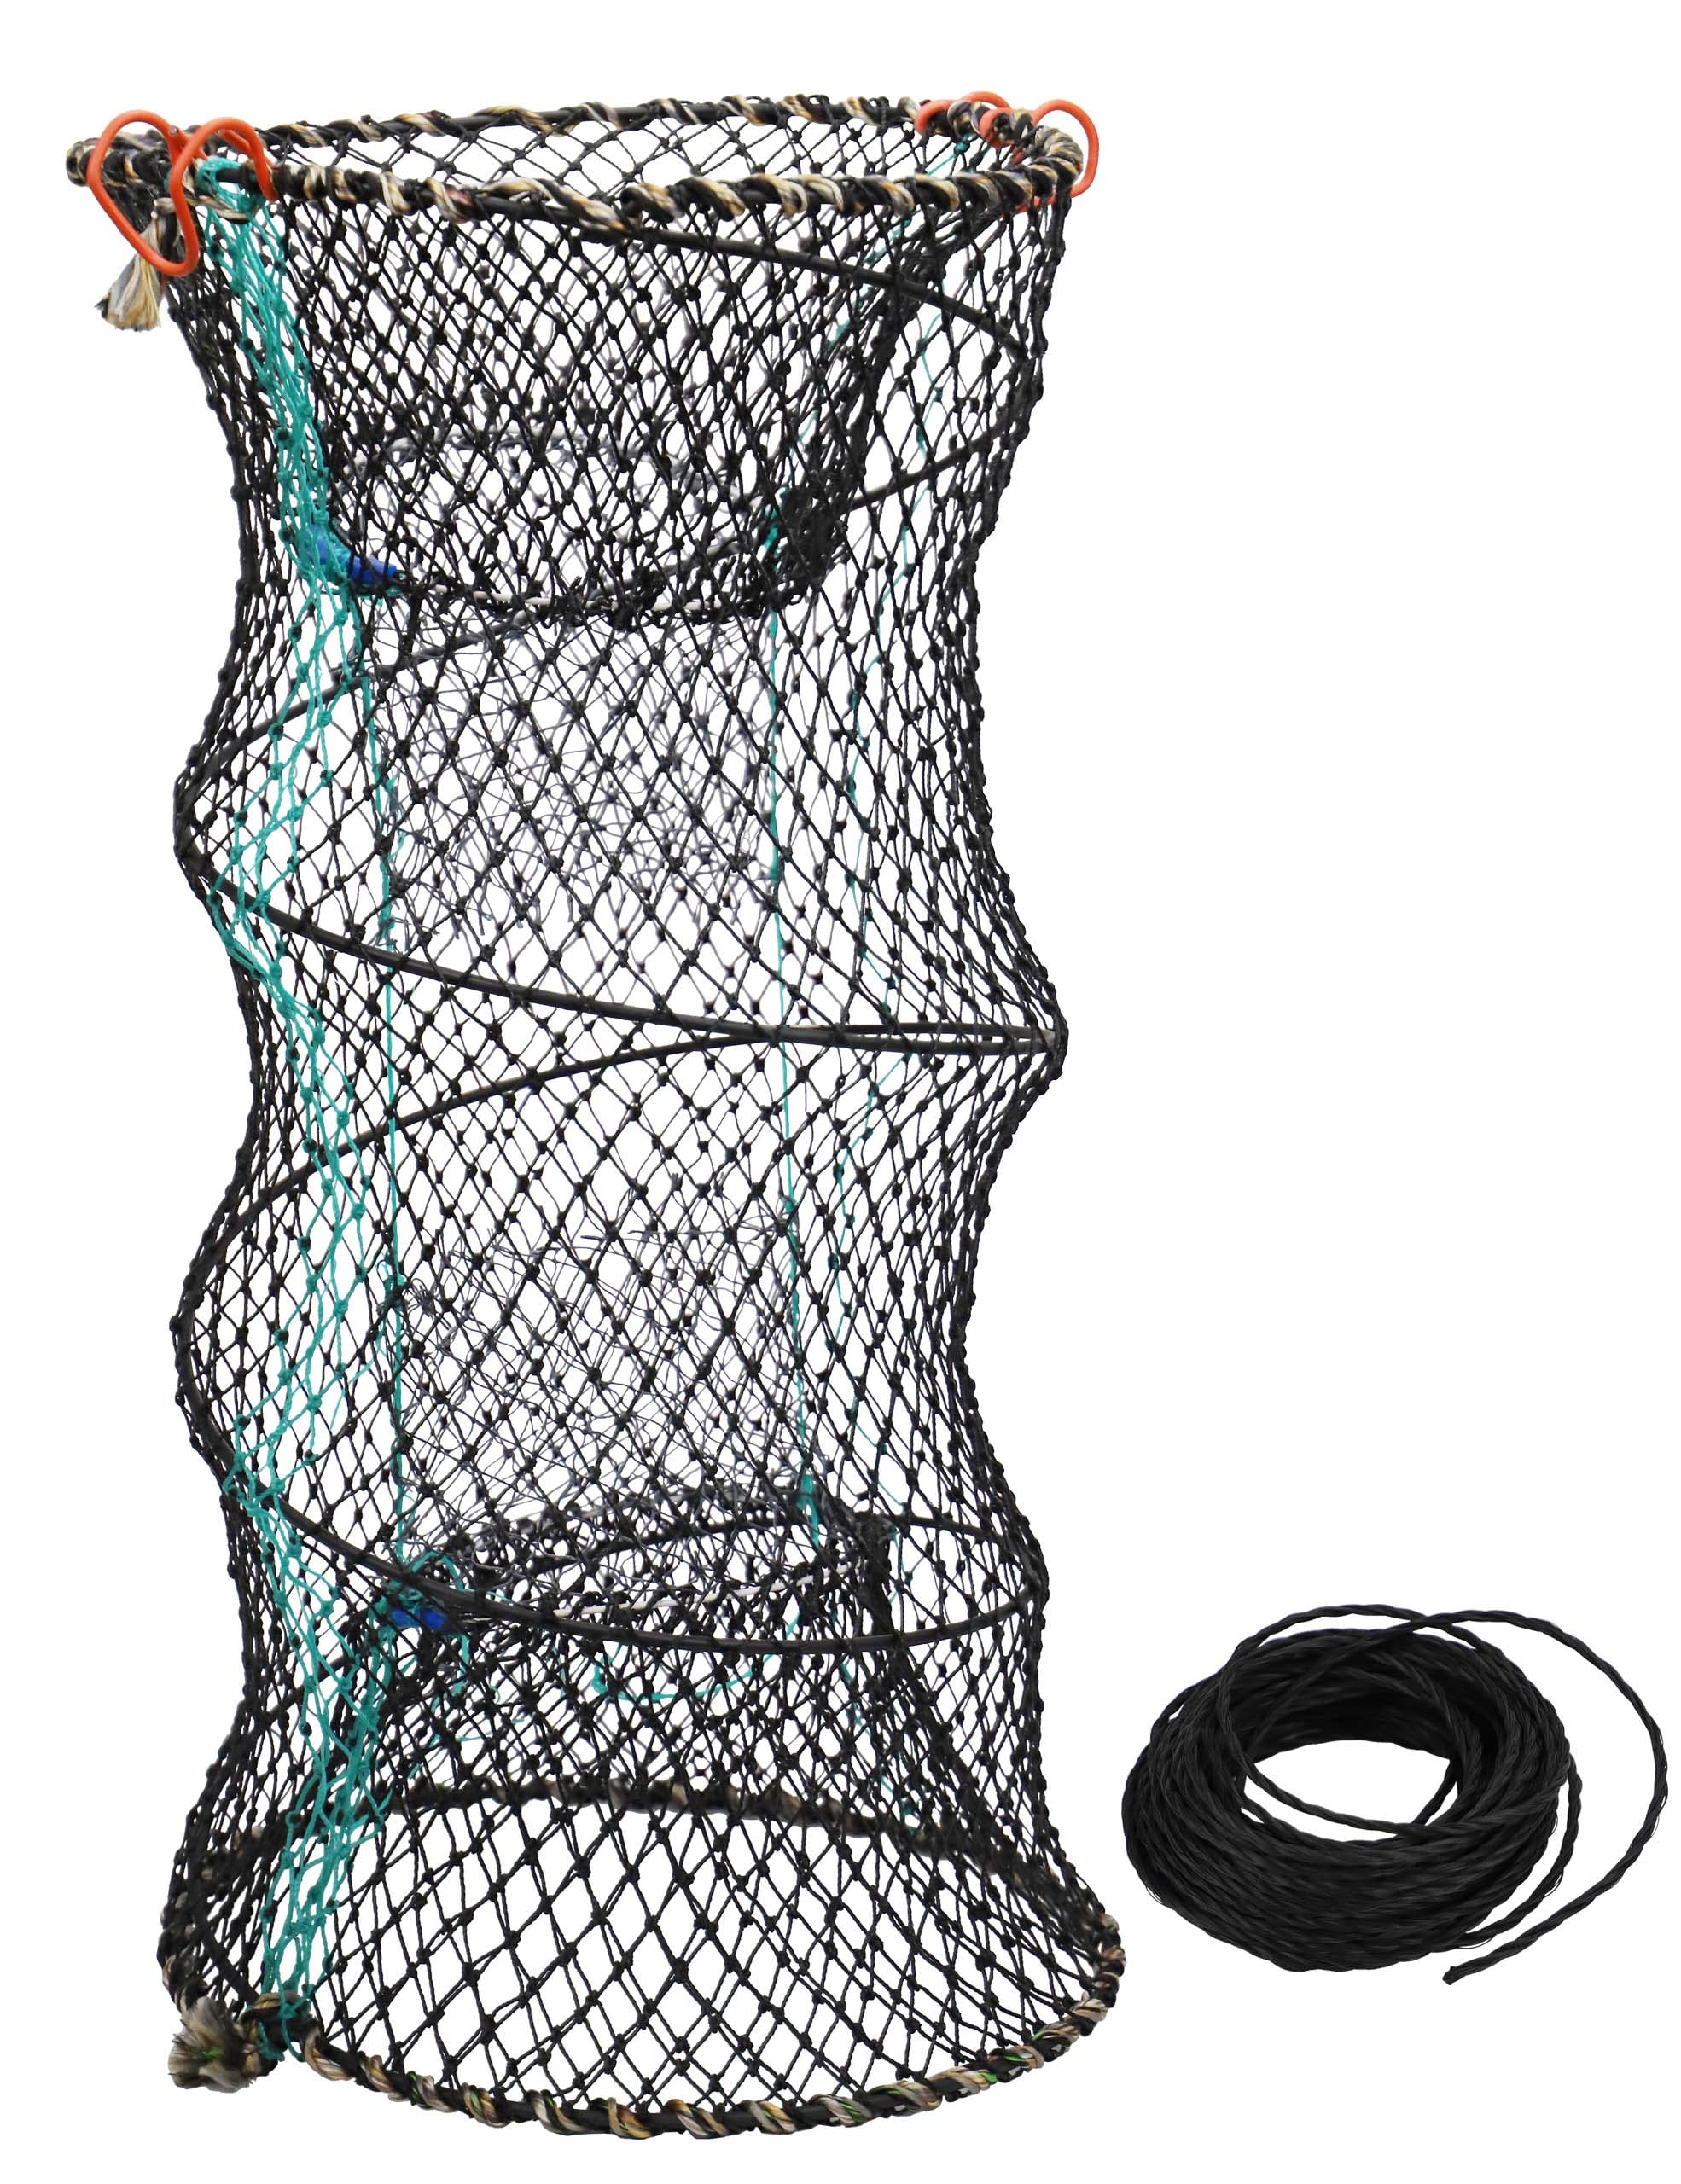  4 Pack Fishing Bait Trap Crab Trap Minnow Trap Crawfish Trap  Lobster Trap Crayfish Shrimp Trap Net Portable Collapsible Fishing Traps  with 49 Ft Rope Folded Fishing Accessories, 12 x